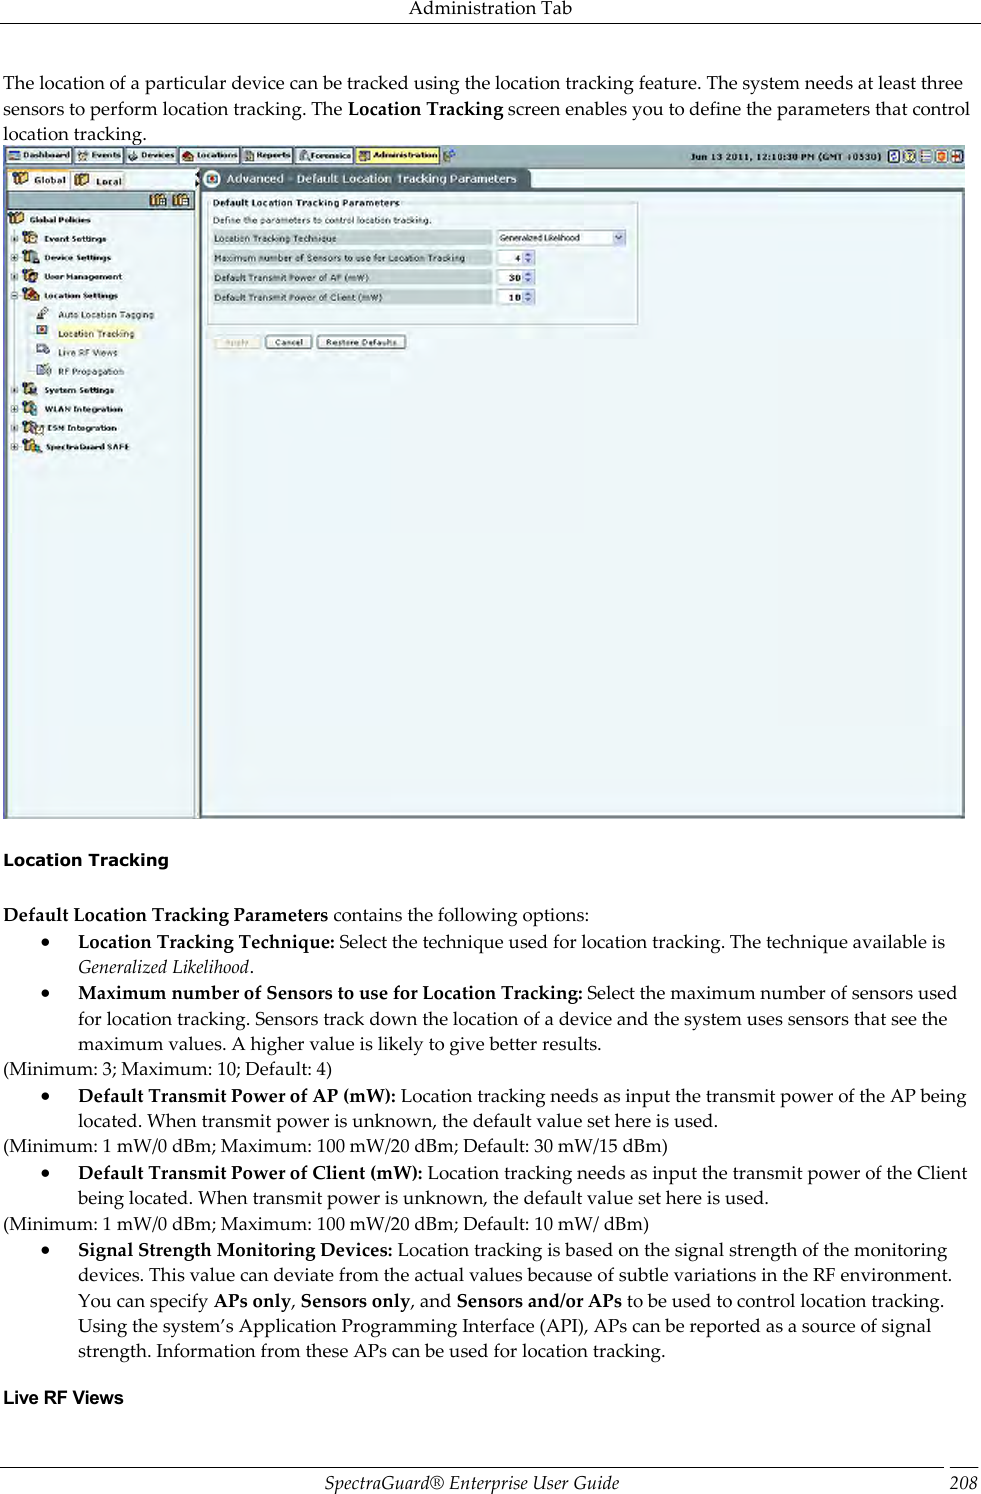 Administration Tab SpectraGuard®  Enterprise User Guide 208 The location of a particular device can be tracked using the location tracking feature. The system needs at least three sensors to perform location tracking. The Location Tracking screen enables you to define the parameters that control location tracking.    Location Tracking   Default Location Tracking Parameters contains the following options:  Location Tracking Technique: Select the technique used for location tracking. The technique available is Generalized Likelihood.  Maximum number of Sensors to use for Location Tracking: Select the maximum number of sensors used for location tracking. Sensors track down the location of a device and the system uses sensors that see the maximum values. A higher value is likely to give better results. (Minimum: 3; Maximum: 10; Default: 4)  Default Transmit Power of AP (mW): Location tracking needs as input the transmit power of the AP being located. When transmit power is unknown, the default value set here is used. (Minimum: 1 mW/0 dBm; Maximum: 100 mW/20 dBm; Default: 30 mW/15 dBm)  Default Transmit Power of Client (mW): Location tracking needs as input the transmit power of the Client being located. When transmit power is unknown, the default value set here is used. (Minimum: 1 mW/0 dBm; Maximum: 100 mW/20 dBm; Default: 10 mW/ dBm)  Signal Strength Monitoring Devices: Location tracking is based on the signal strength of the monitoring devices. This value can deviate from the actual values because of subtle variations in the RF environment. You can specify APs only, Sensors only, and Sensors and/or APs to be used to control location tracking. Using the system’s Application Programming Interface (API), APs can be reported as a source of signal strength. Information from these APs can be used for location tracking. Live RF Views 